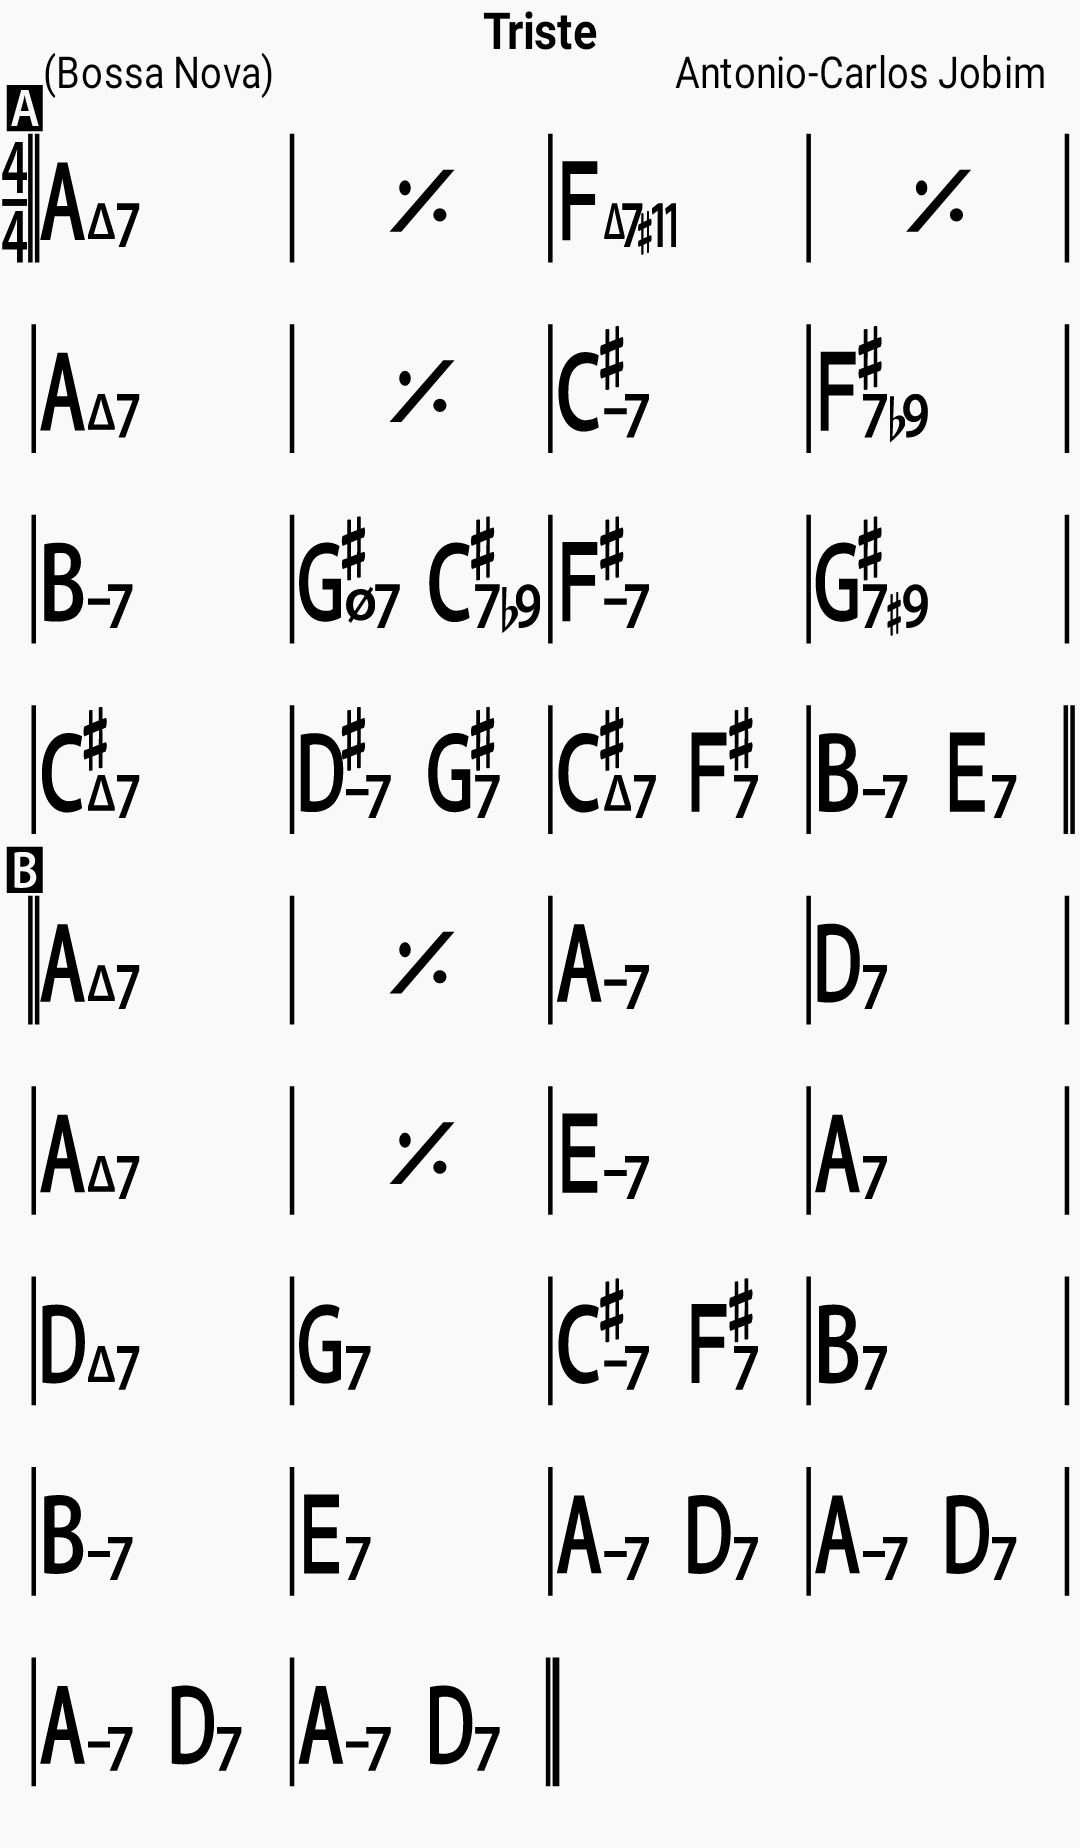 Chord chart for the jazz standard Triste